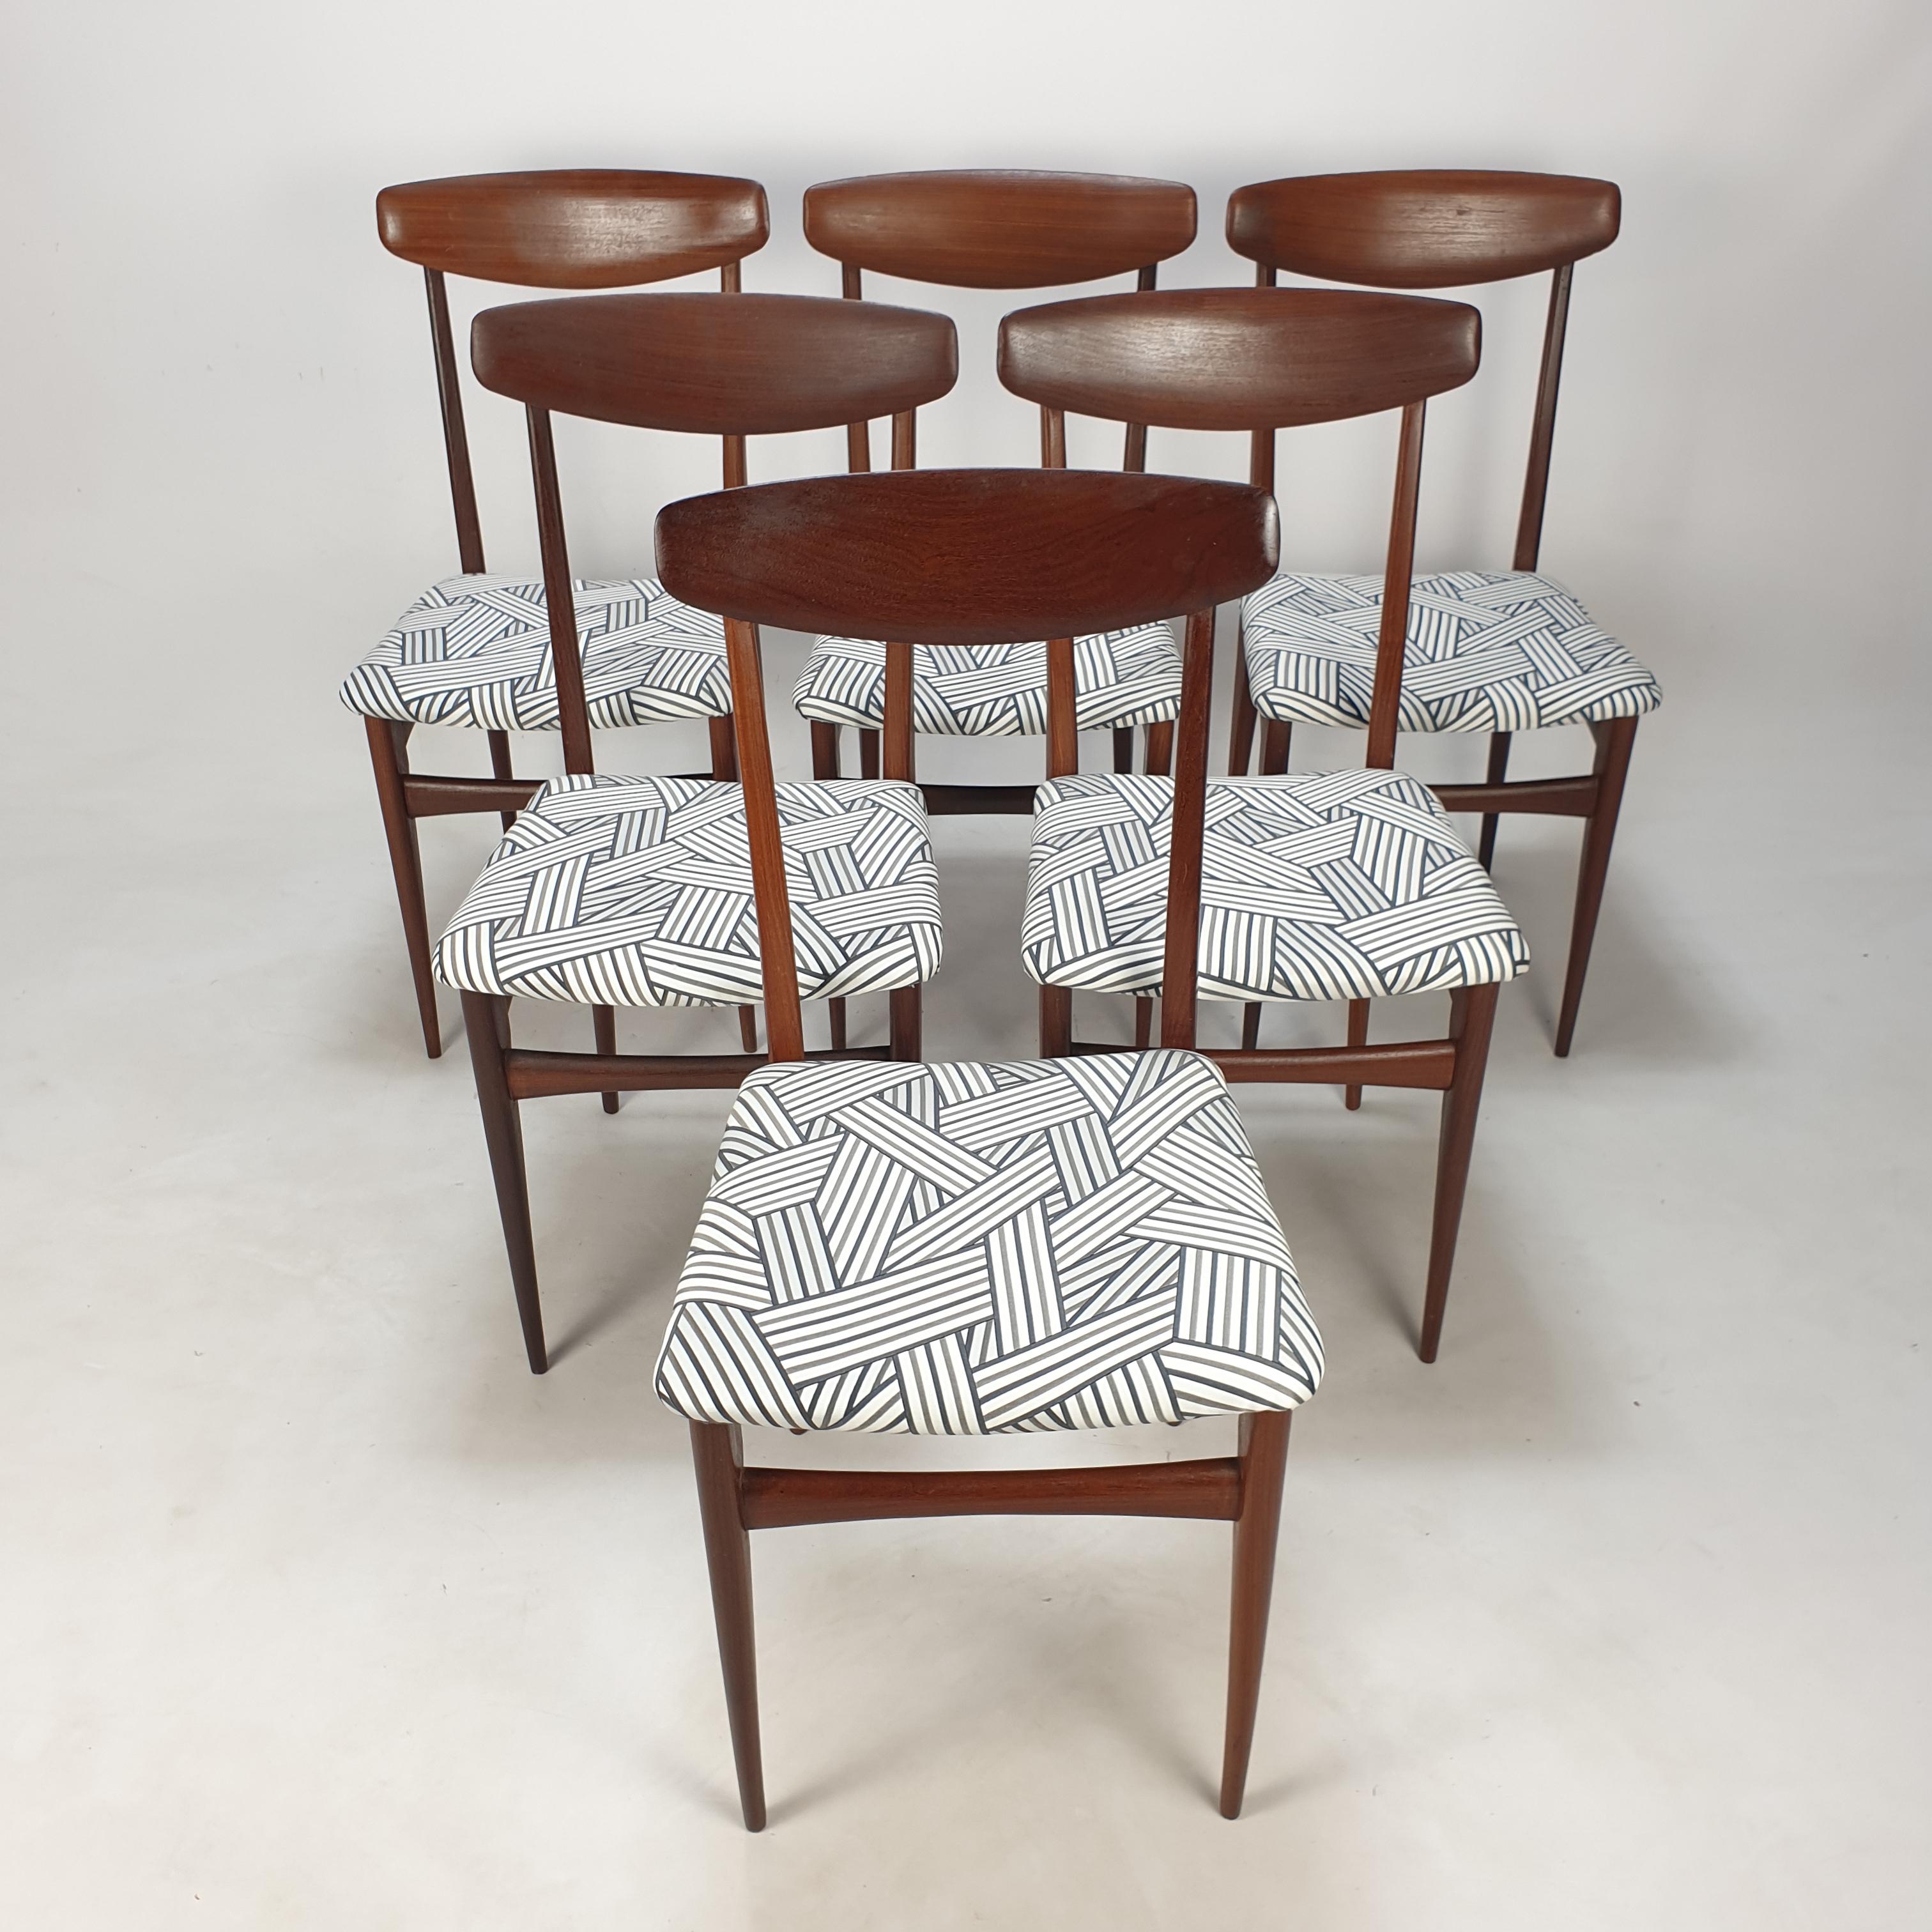 Lovely set of 6 dining chairs, designed and fabricated in Italy in the 50's.

The teak wooden structure is very elegant but solid.

The chairs are just reupholstered with new wonderful Dedar Italy fabric and new foam. 
The wooden structures are